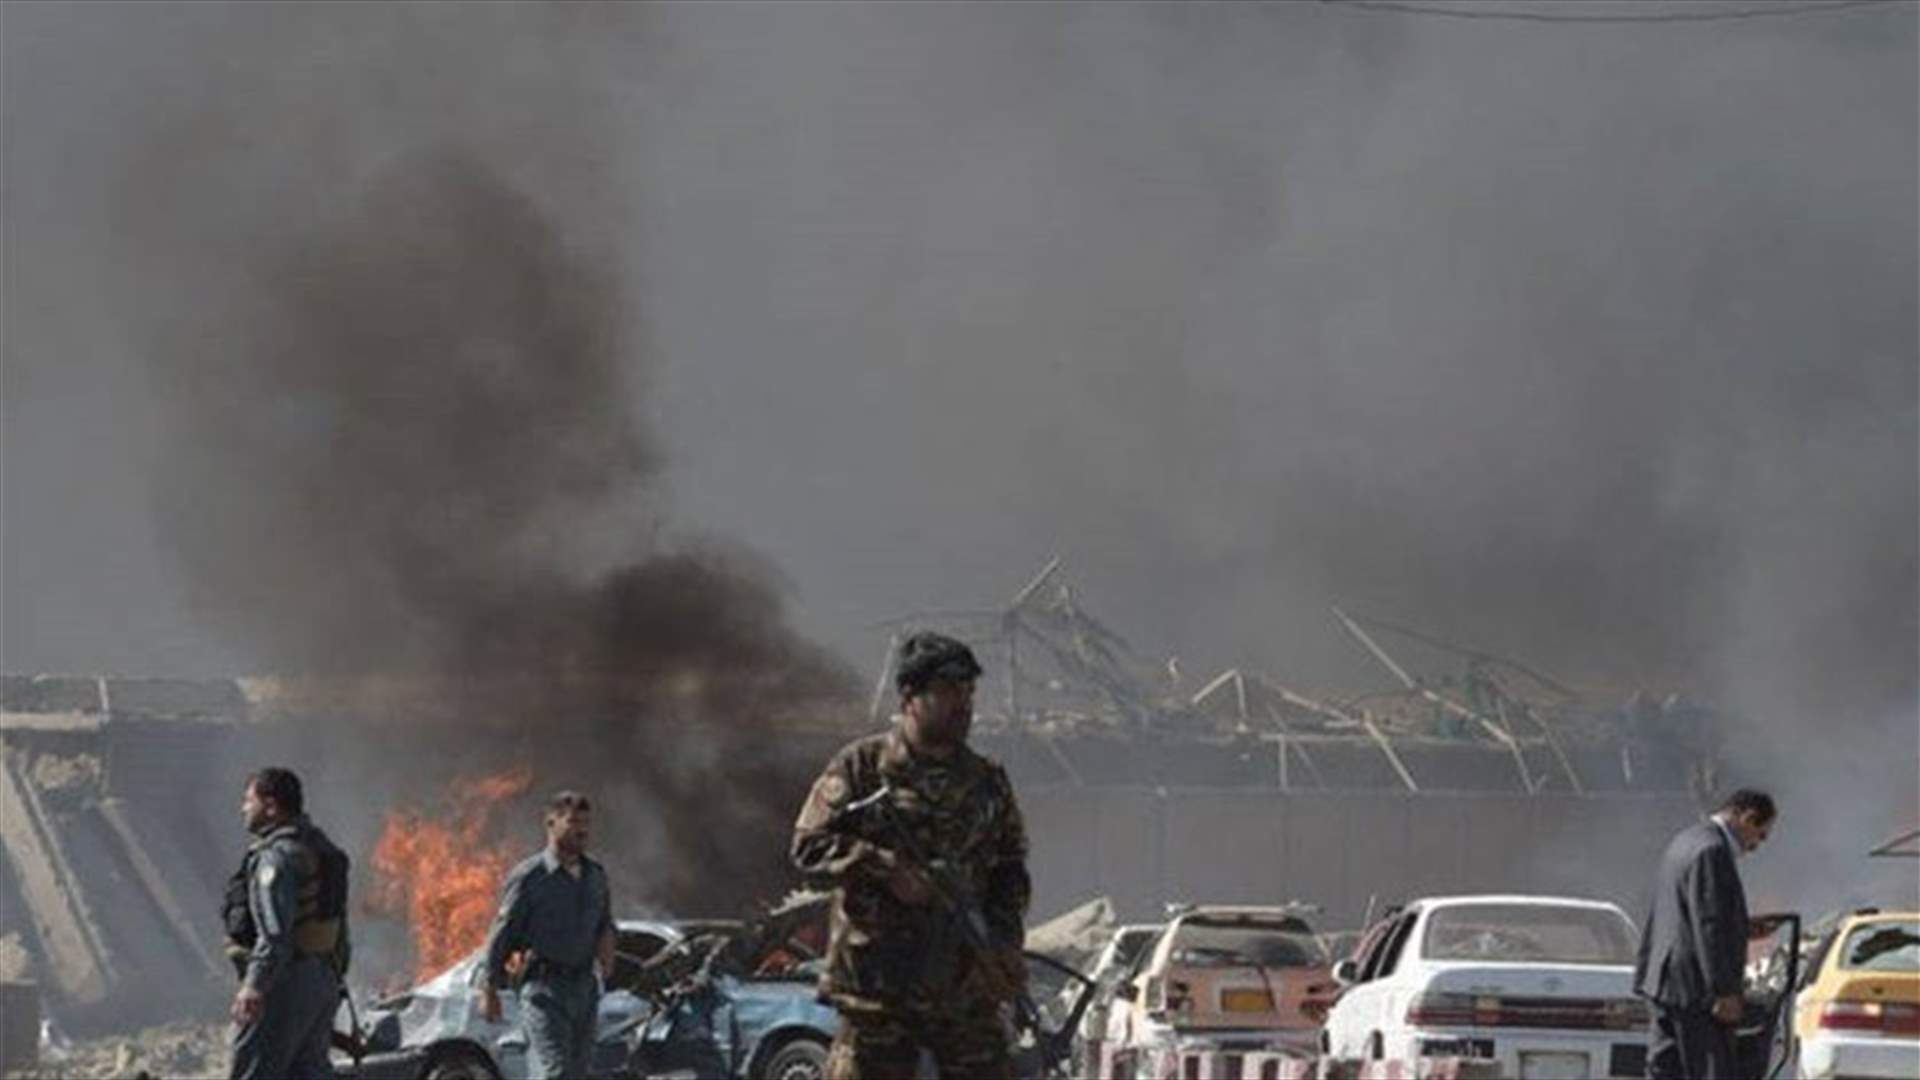 Suicide bomber kills at least 26 near shrine in Afghan capital